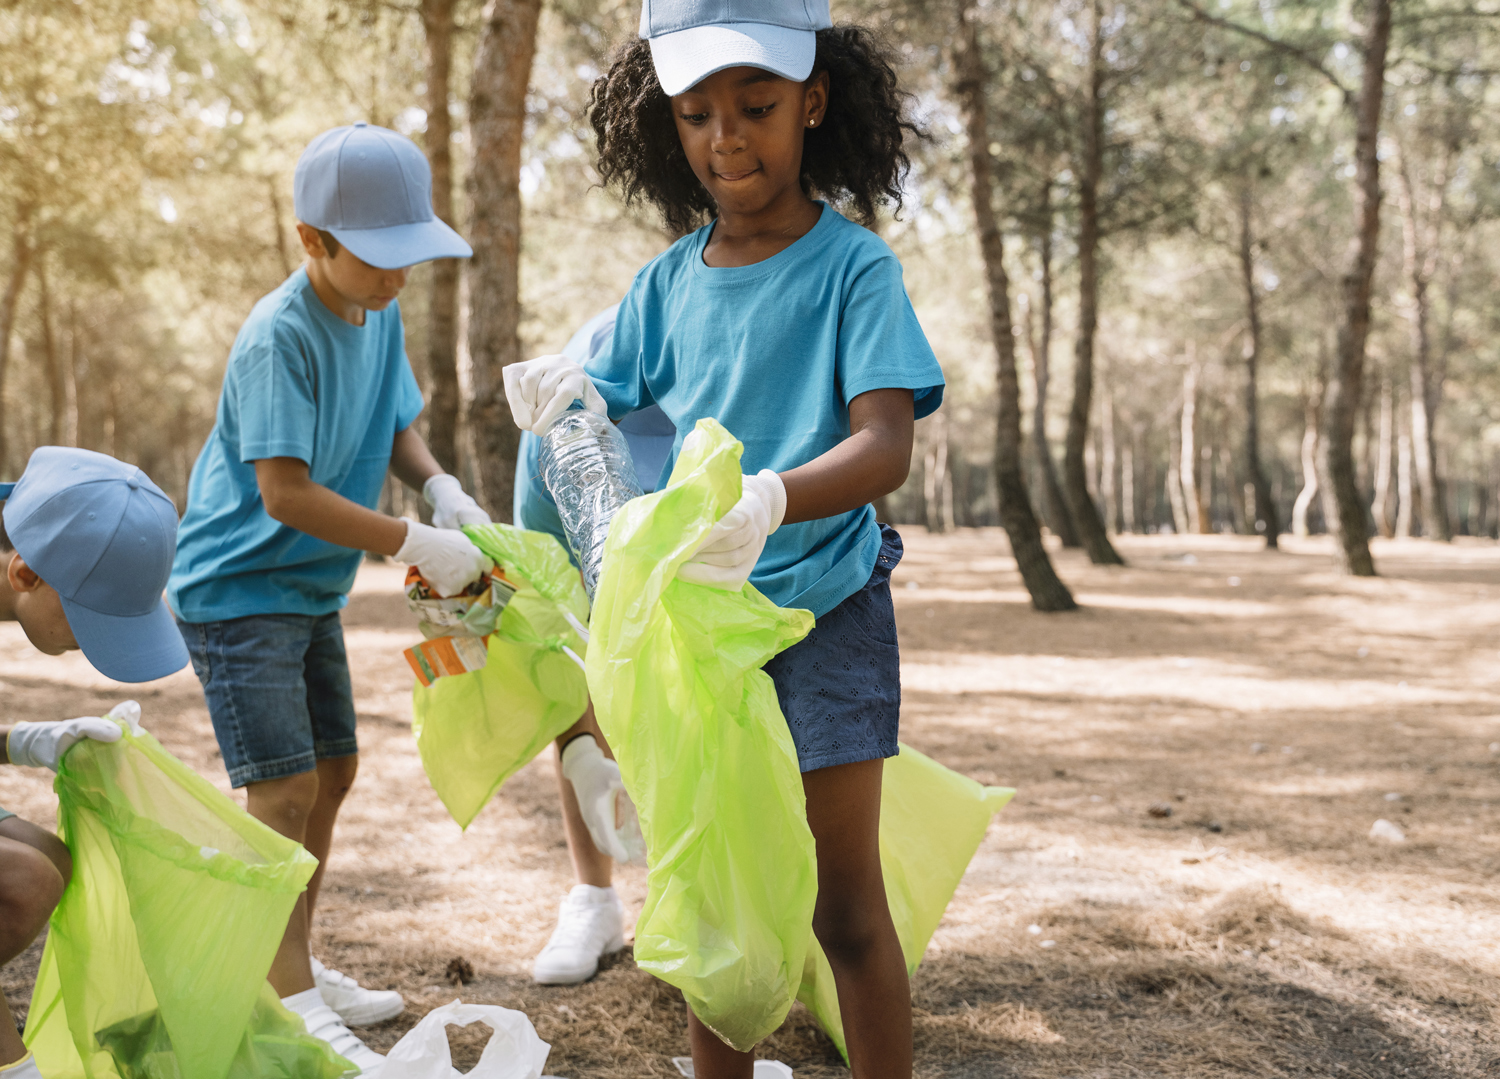 Young children in a wooded area put litter into plastic bags.